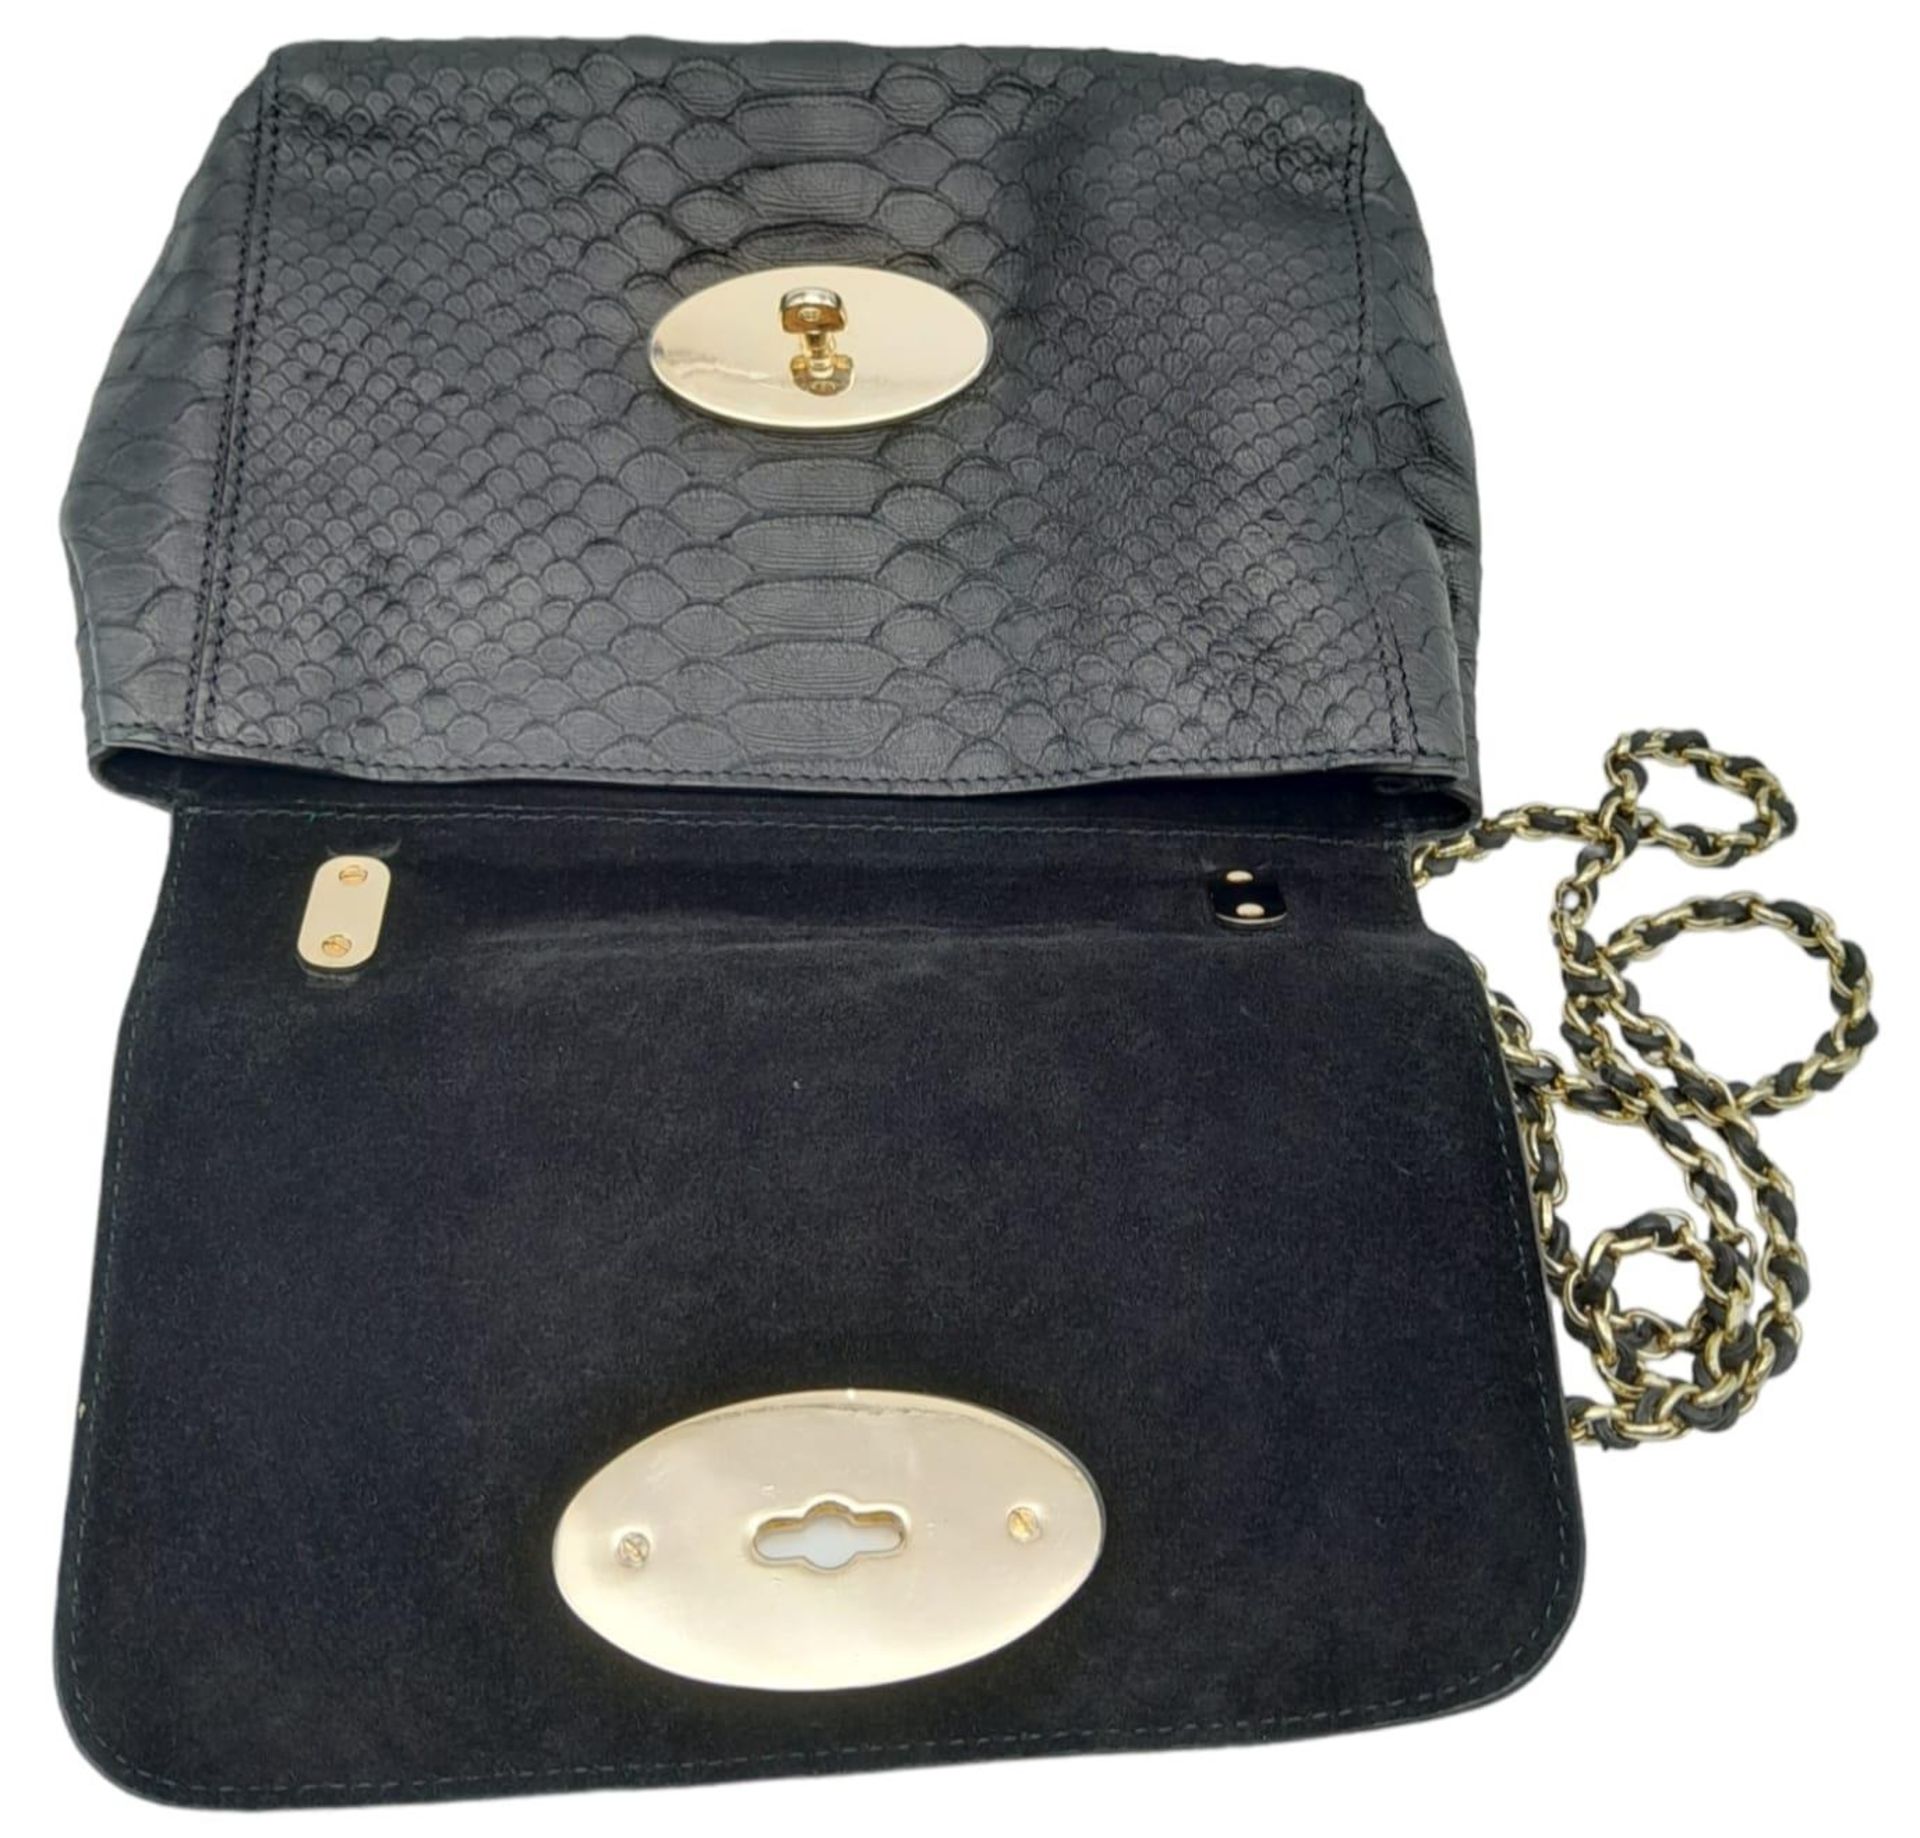 A Mulberry Black Cecily Shoulder Bag. Snakeskin exterior with gold-toned hardware, chain and leather - Image 6 of 8